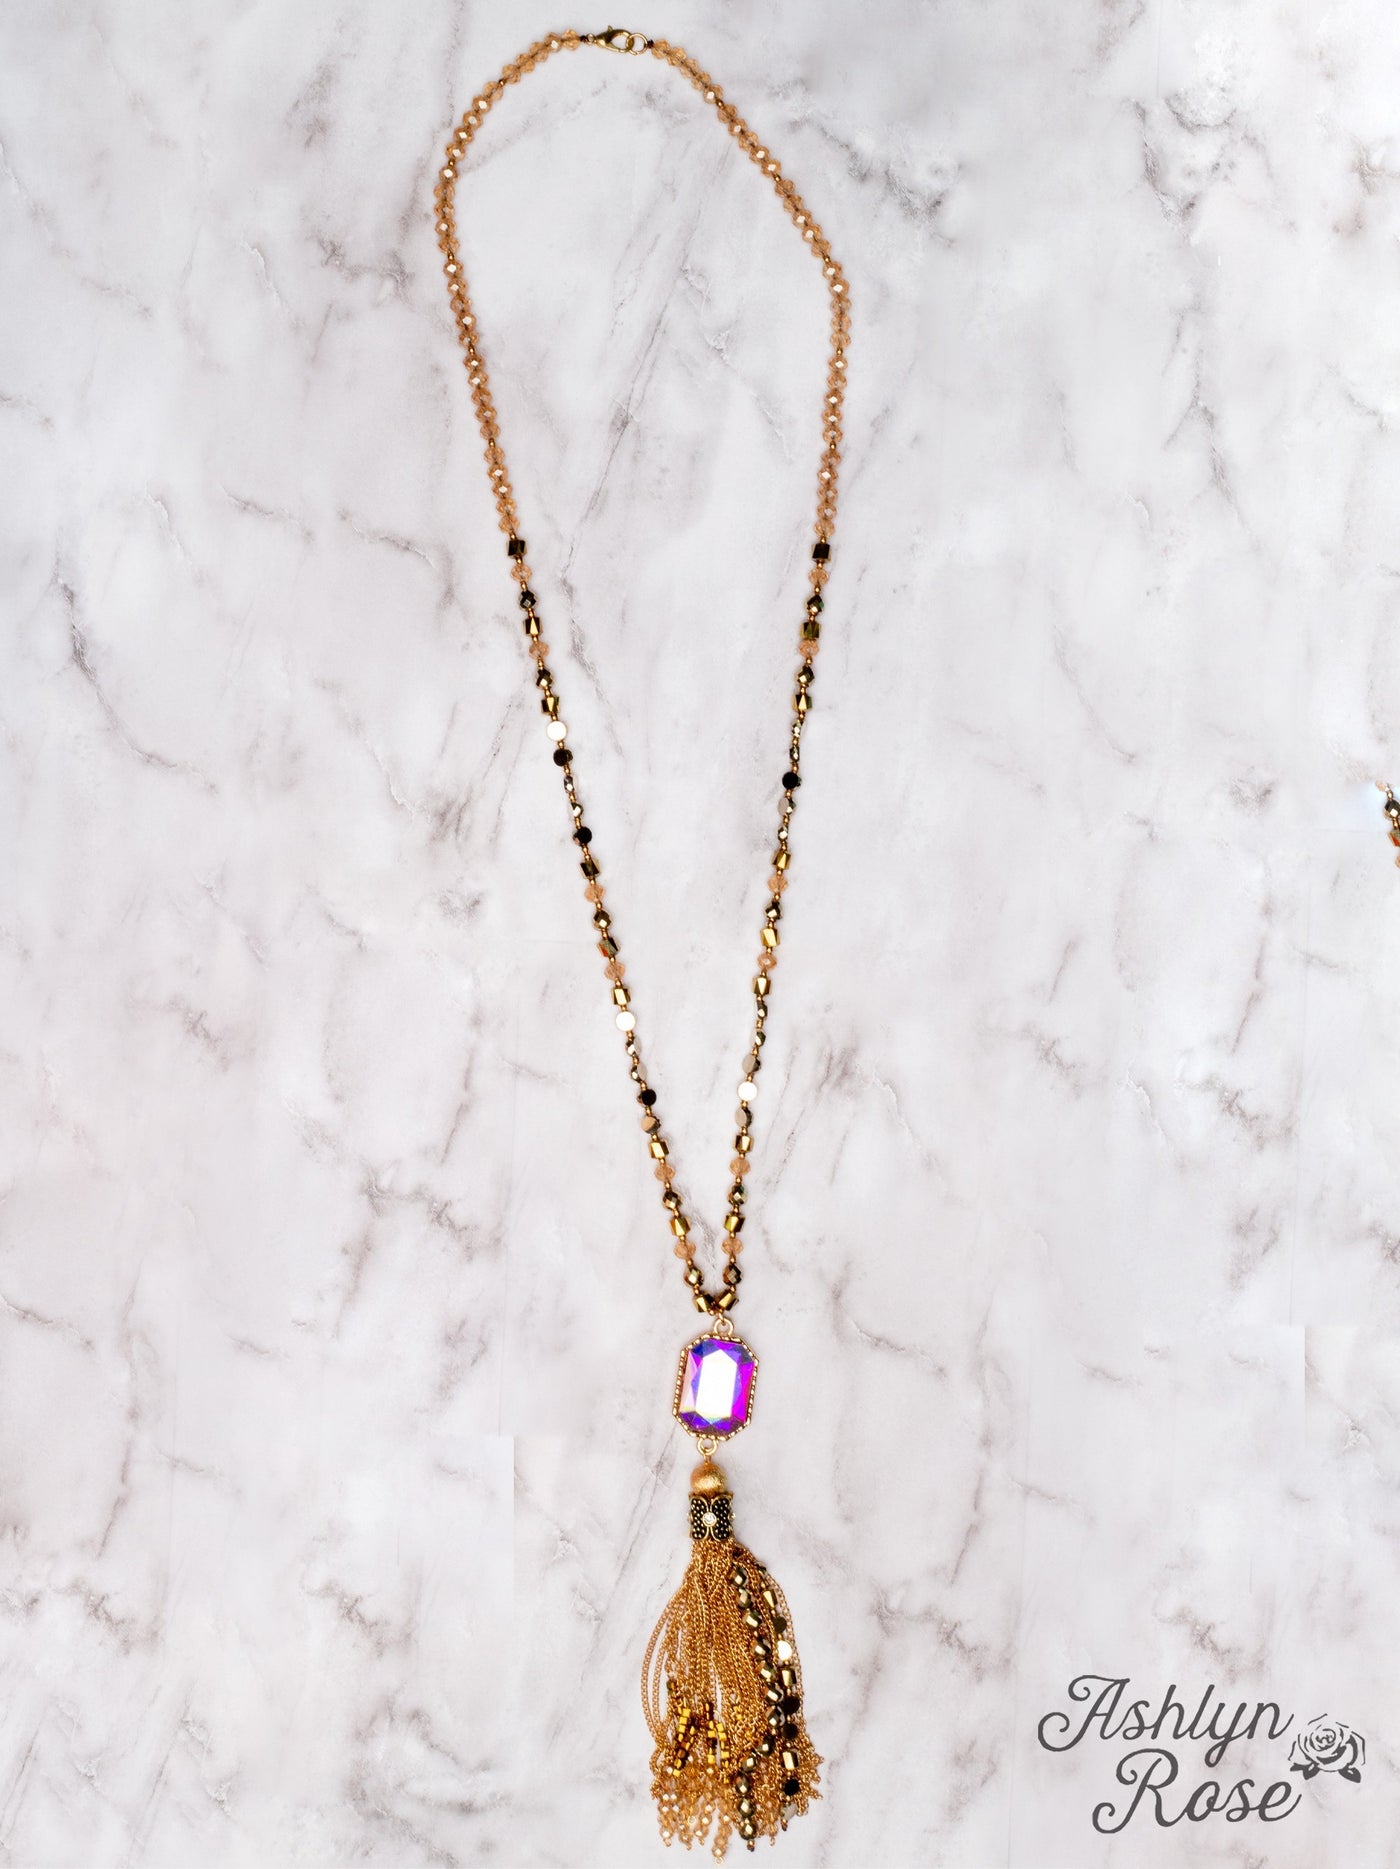 WATCH THE SUNSET WITH ME IRIDESCENT PENDANT WITH GOLD CHAIN TASSELS ON A MIXED CRYSTAL BEADED NECKLACE, BROWN